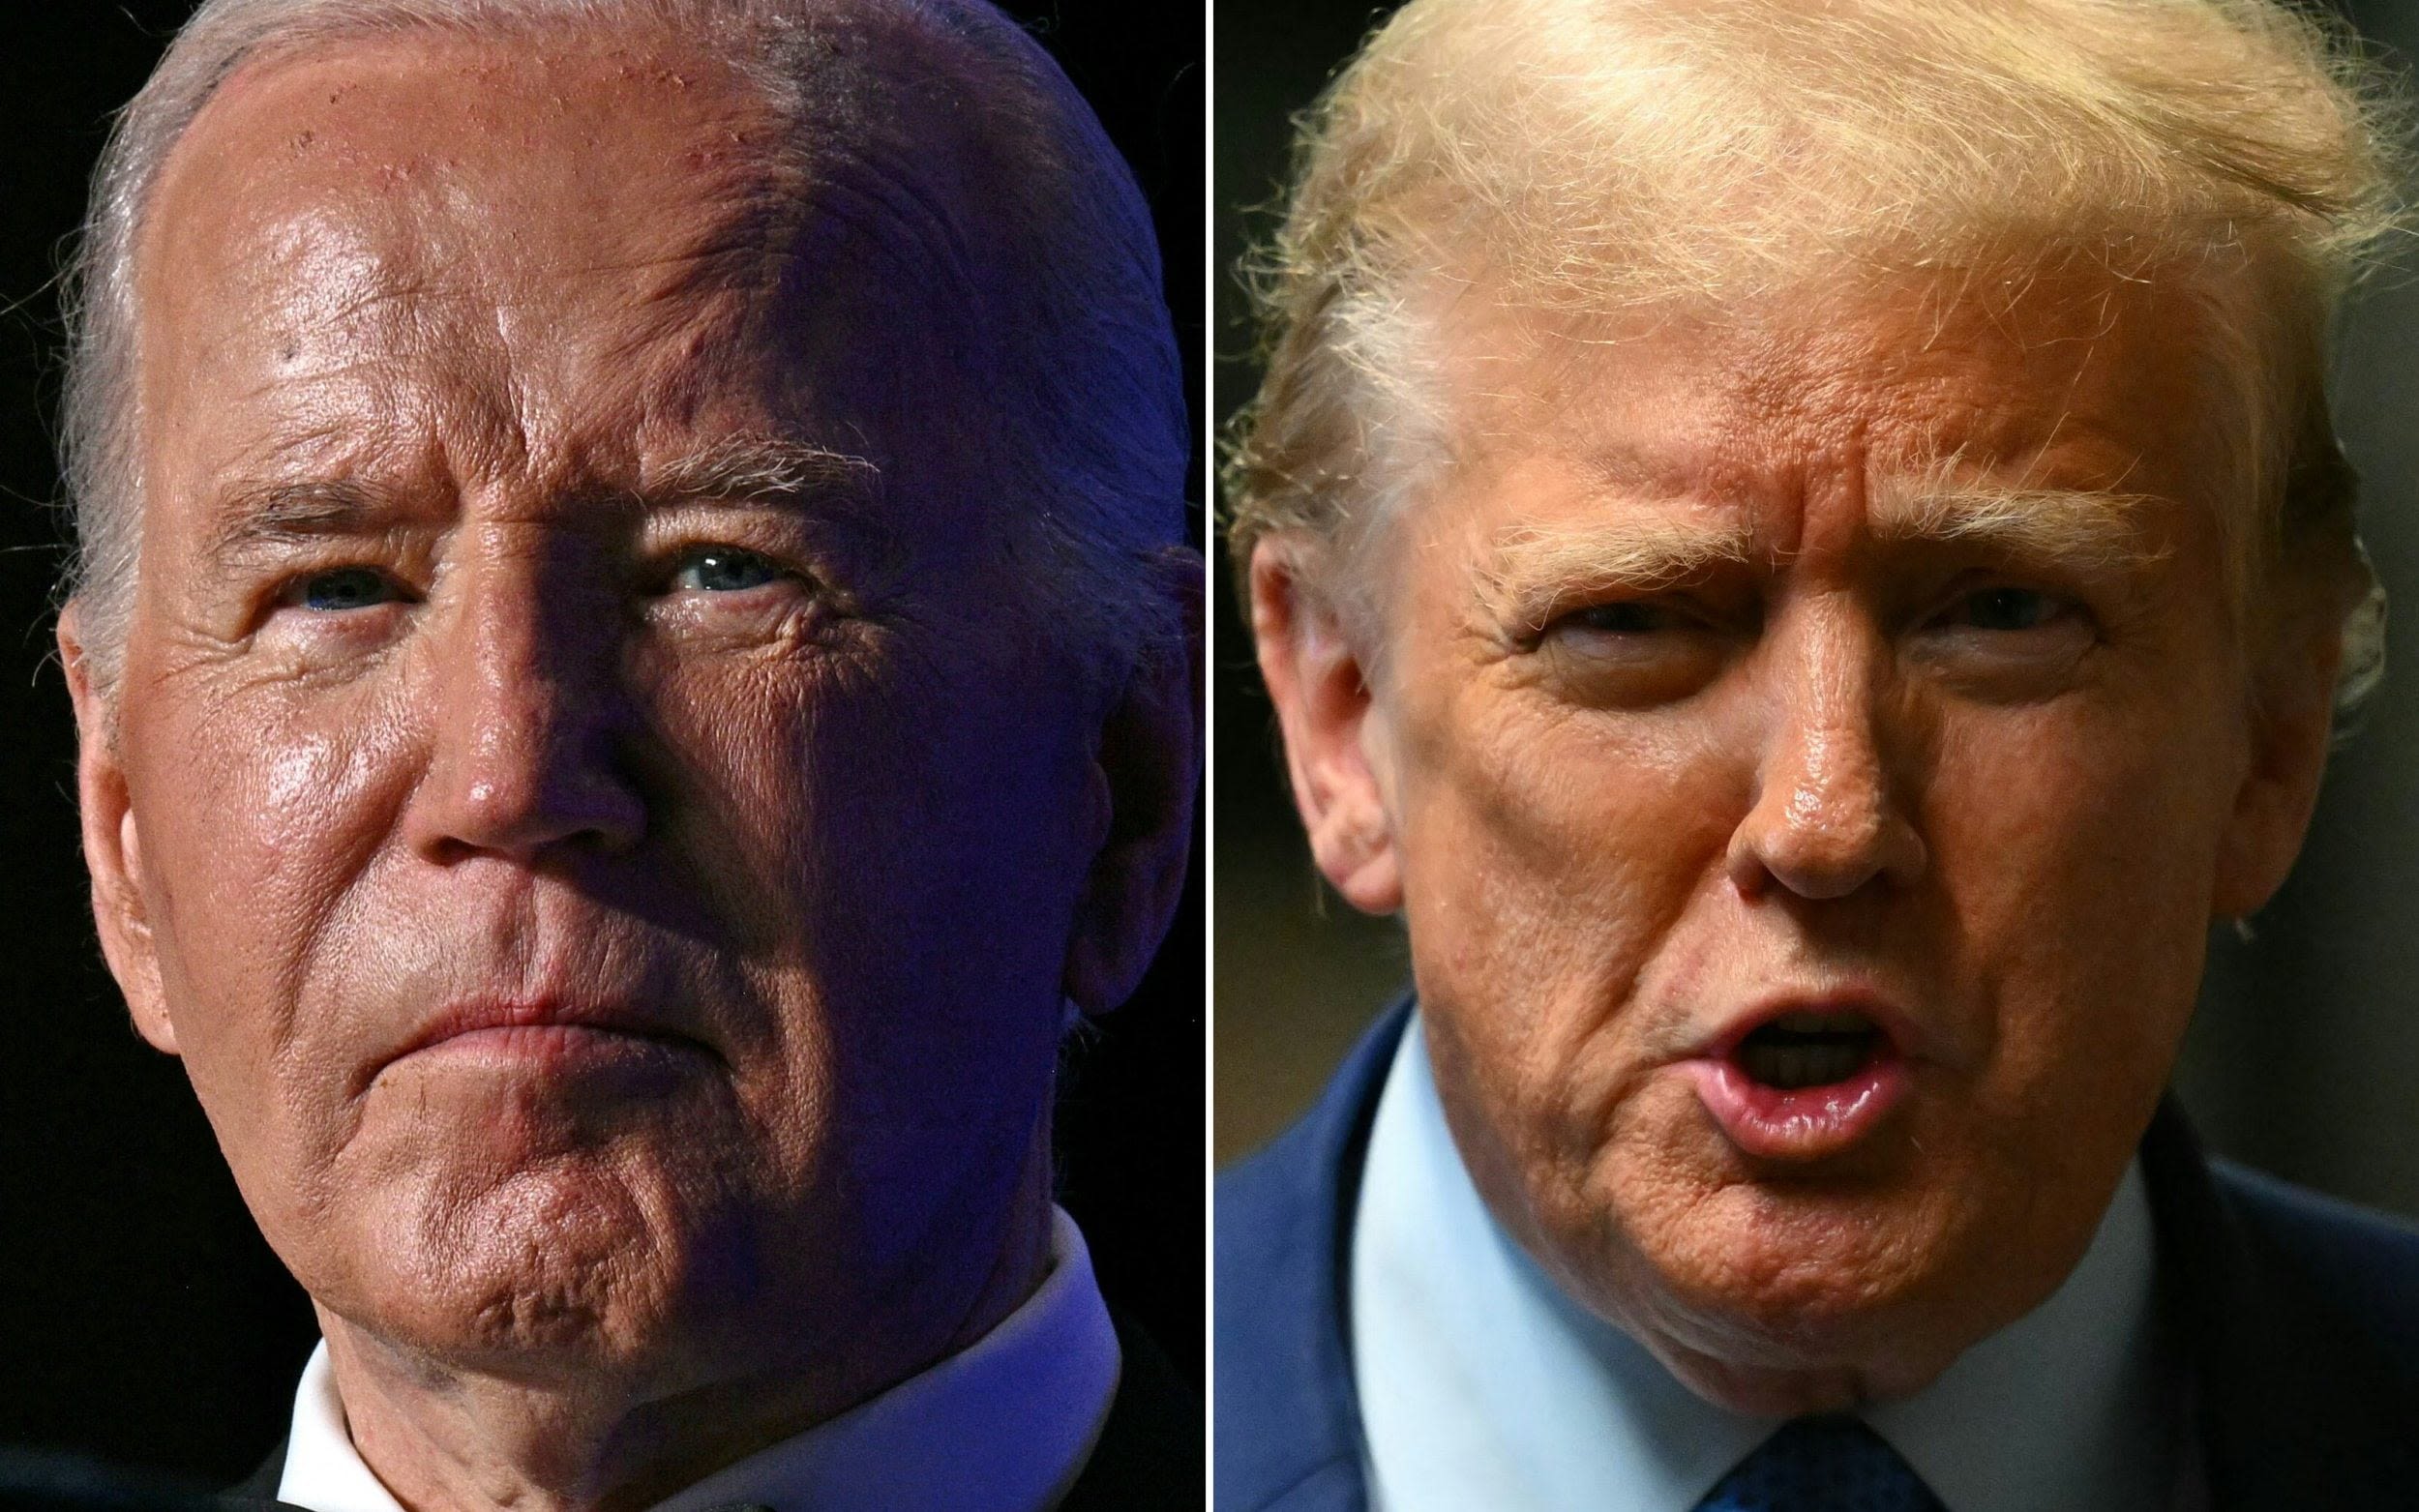 When is the presidential election debate tonight? How to watch Trump v Biden